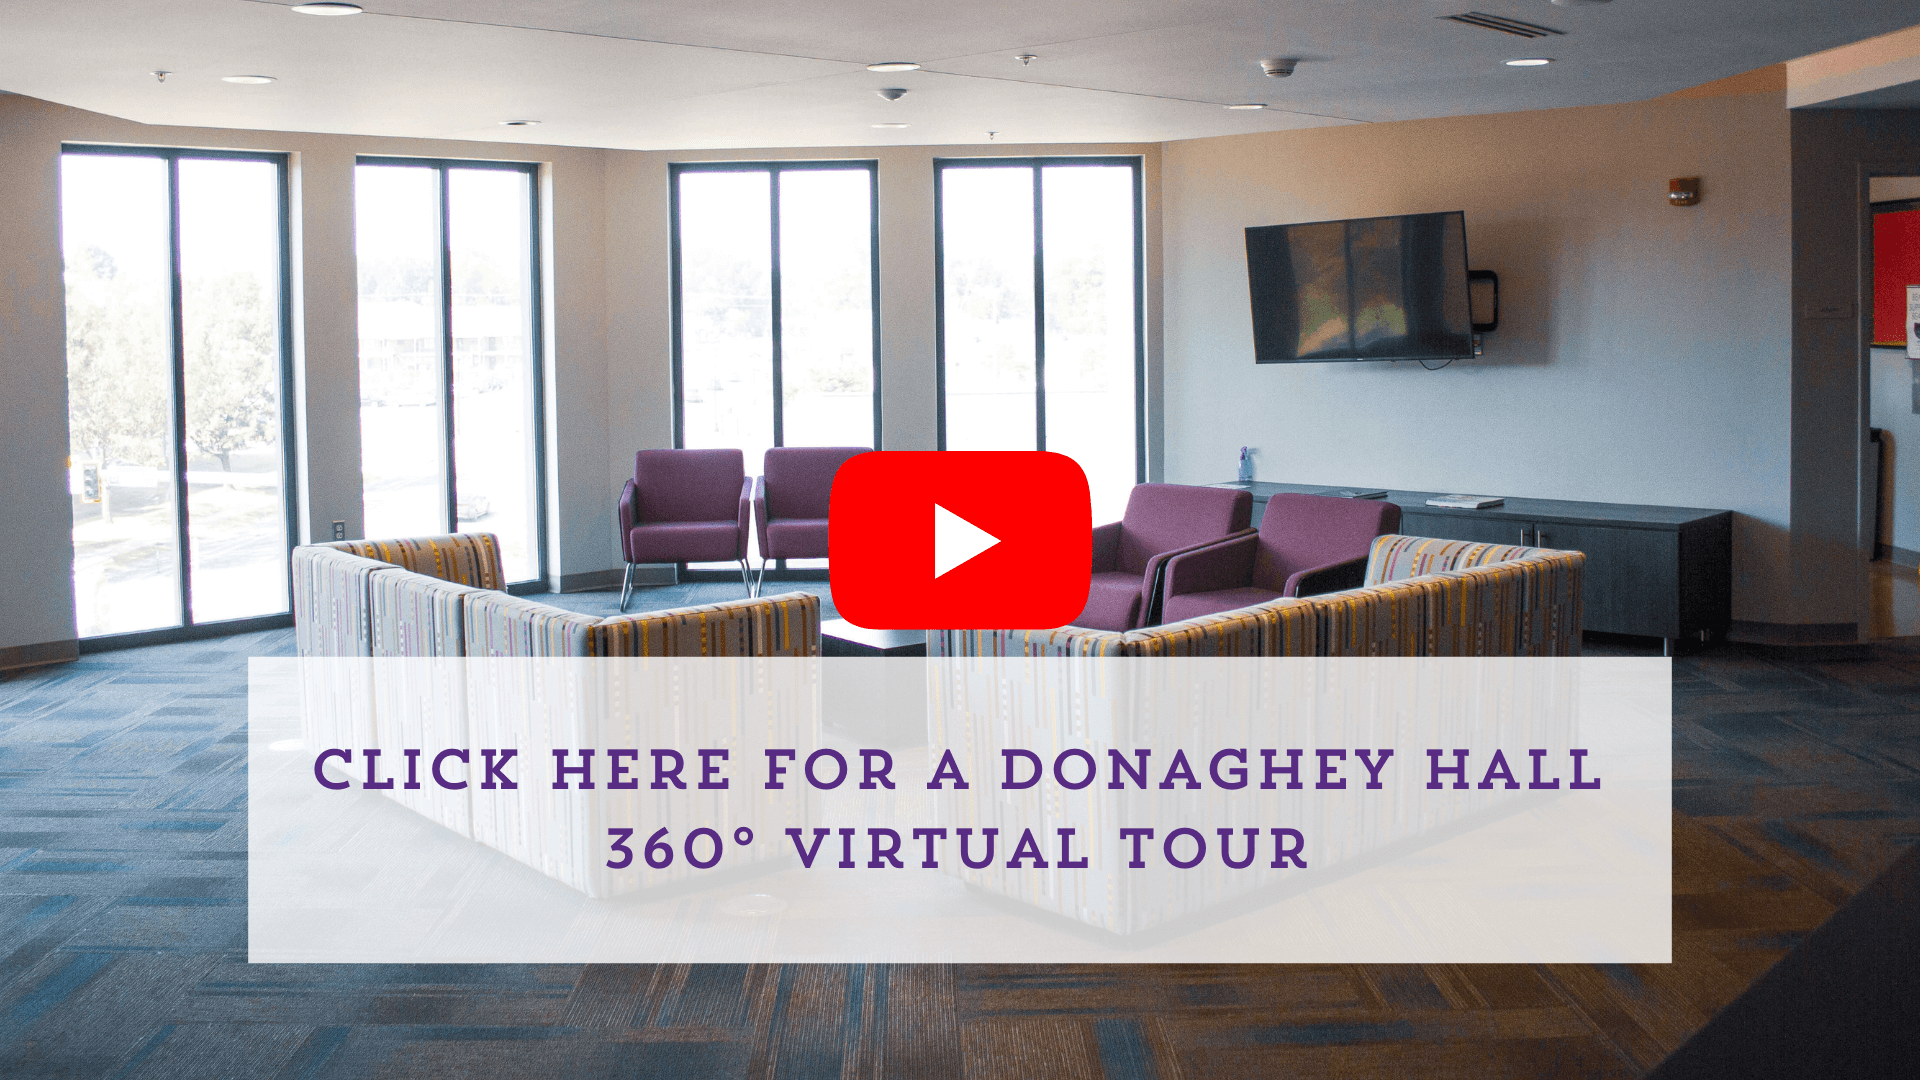 alt text: click here for a donaghey hall 360 degree virtual tour